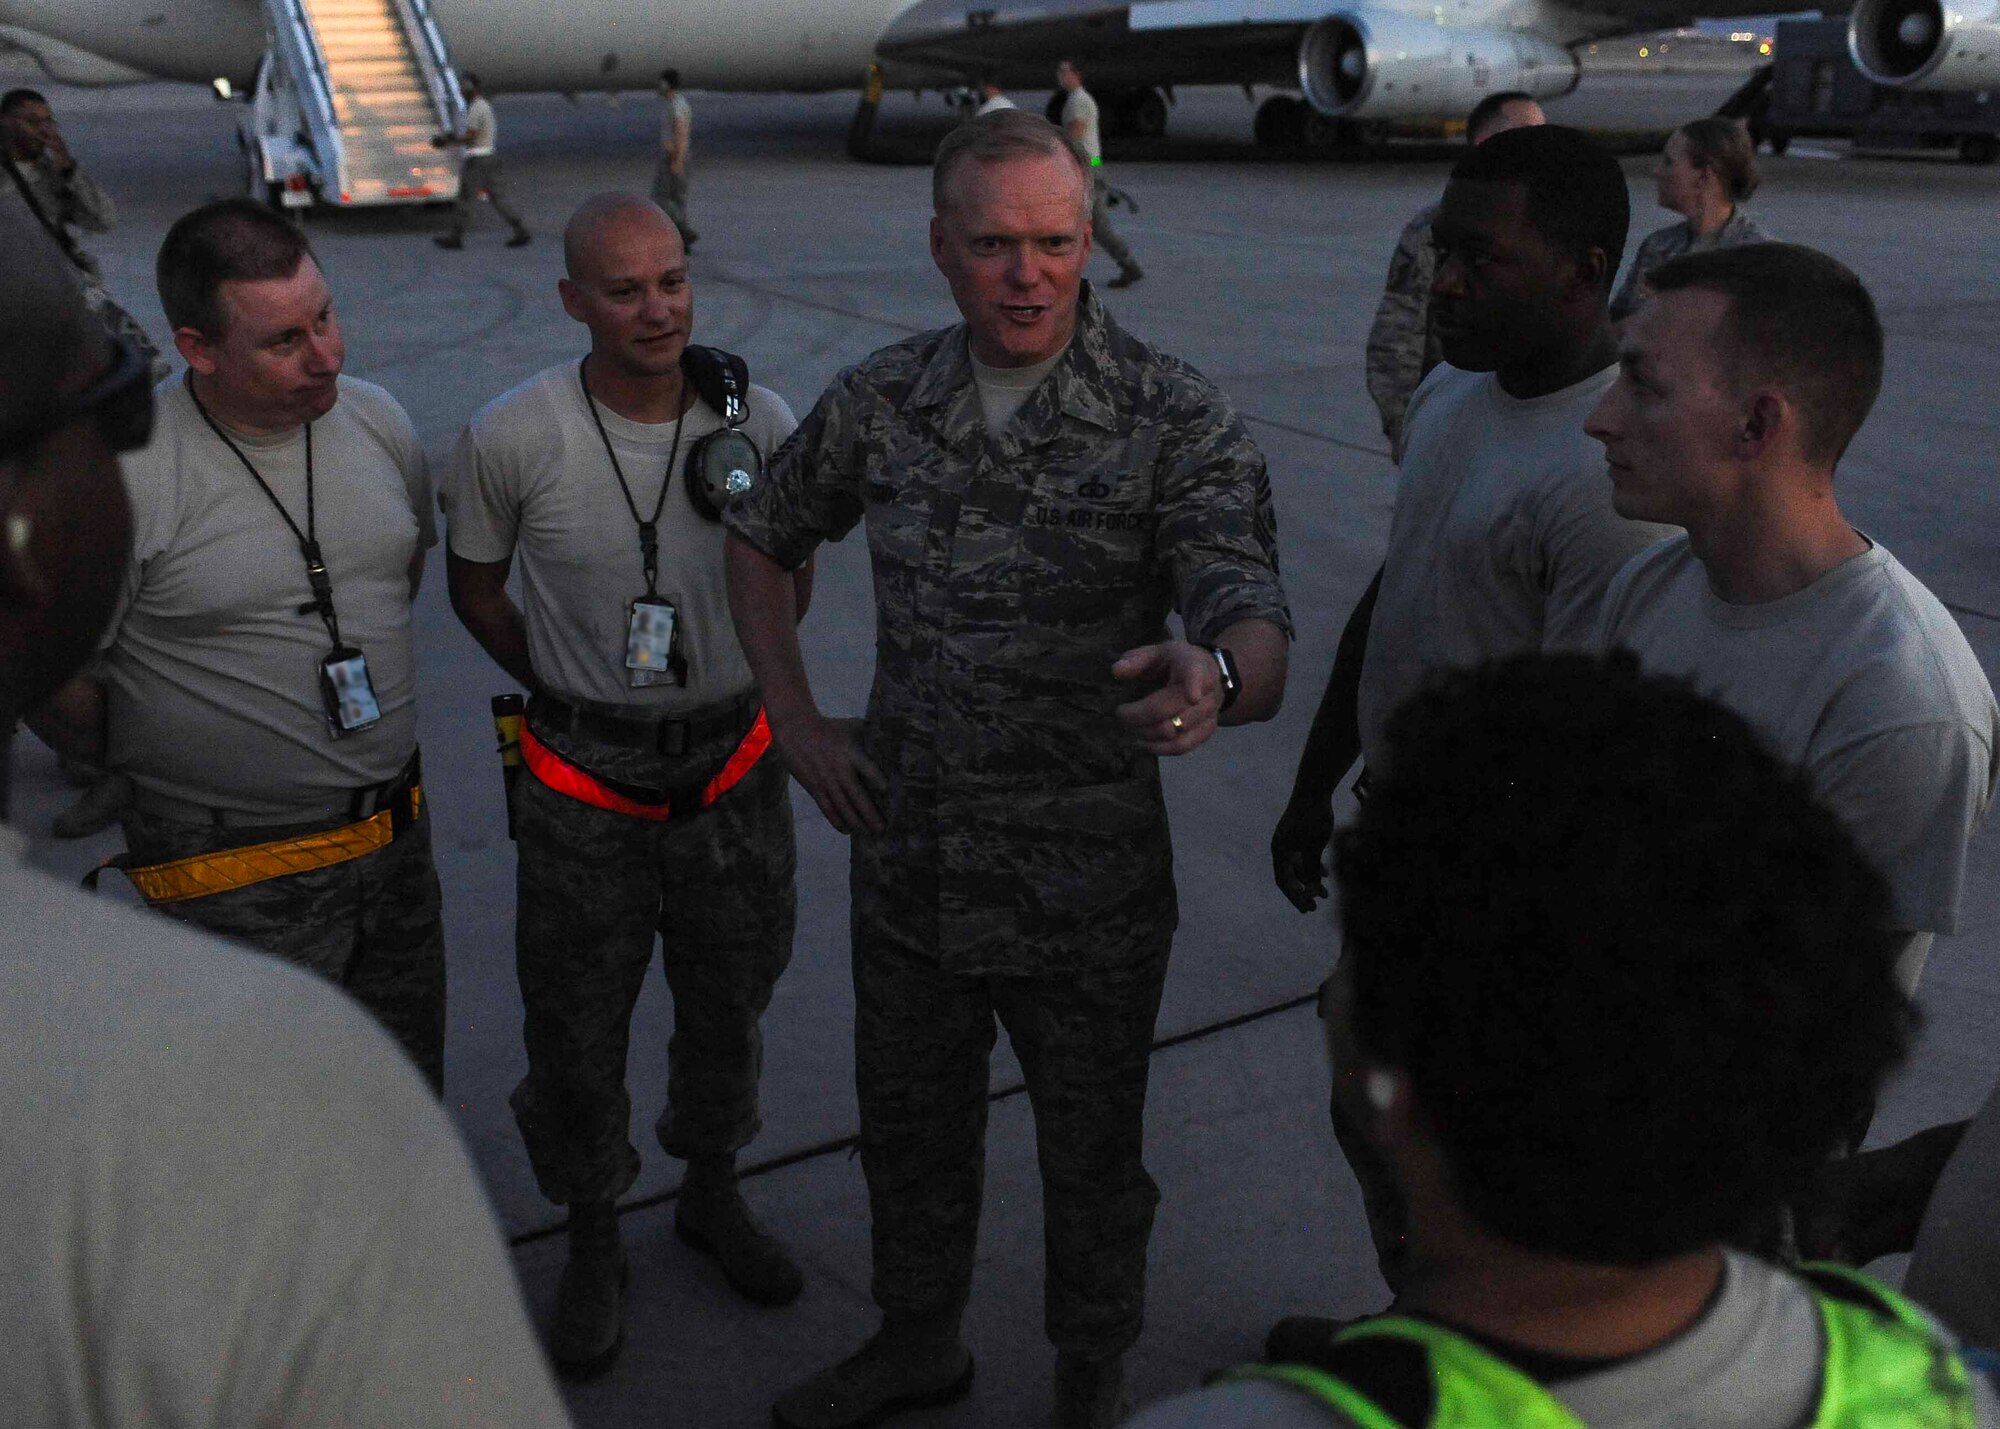 Chief Master Sgt. of the Air Force James A. Cody speaks with Airmen assigned to an E-8 Joint Stars from Robins Air Force Base, Ga. during a meet and great on the flightline at Nellis AFB, Nev., July 27, 2016. During the conversations, Cody would ask Airmen what their biggest concerns are for the Air Force and offered guidance on how the leadership of the U.S. Air Force is handling the situation. (U.S. Air Force photo by Senior Airman Jake Carter/Released)